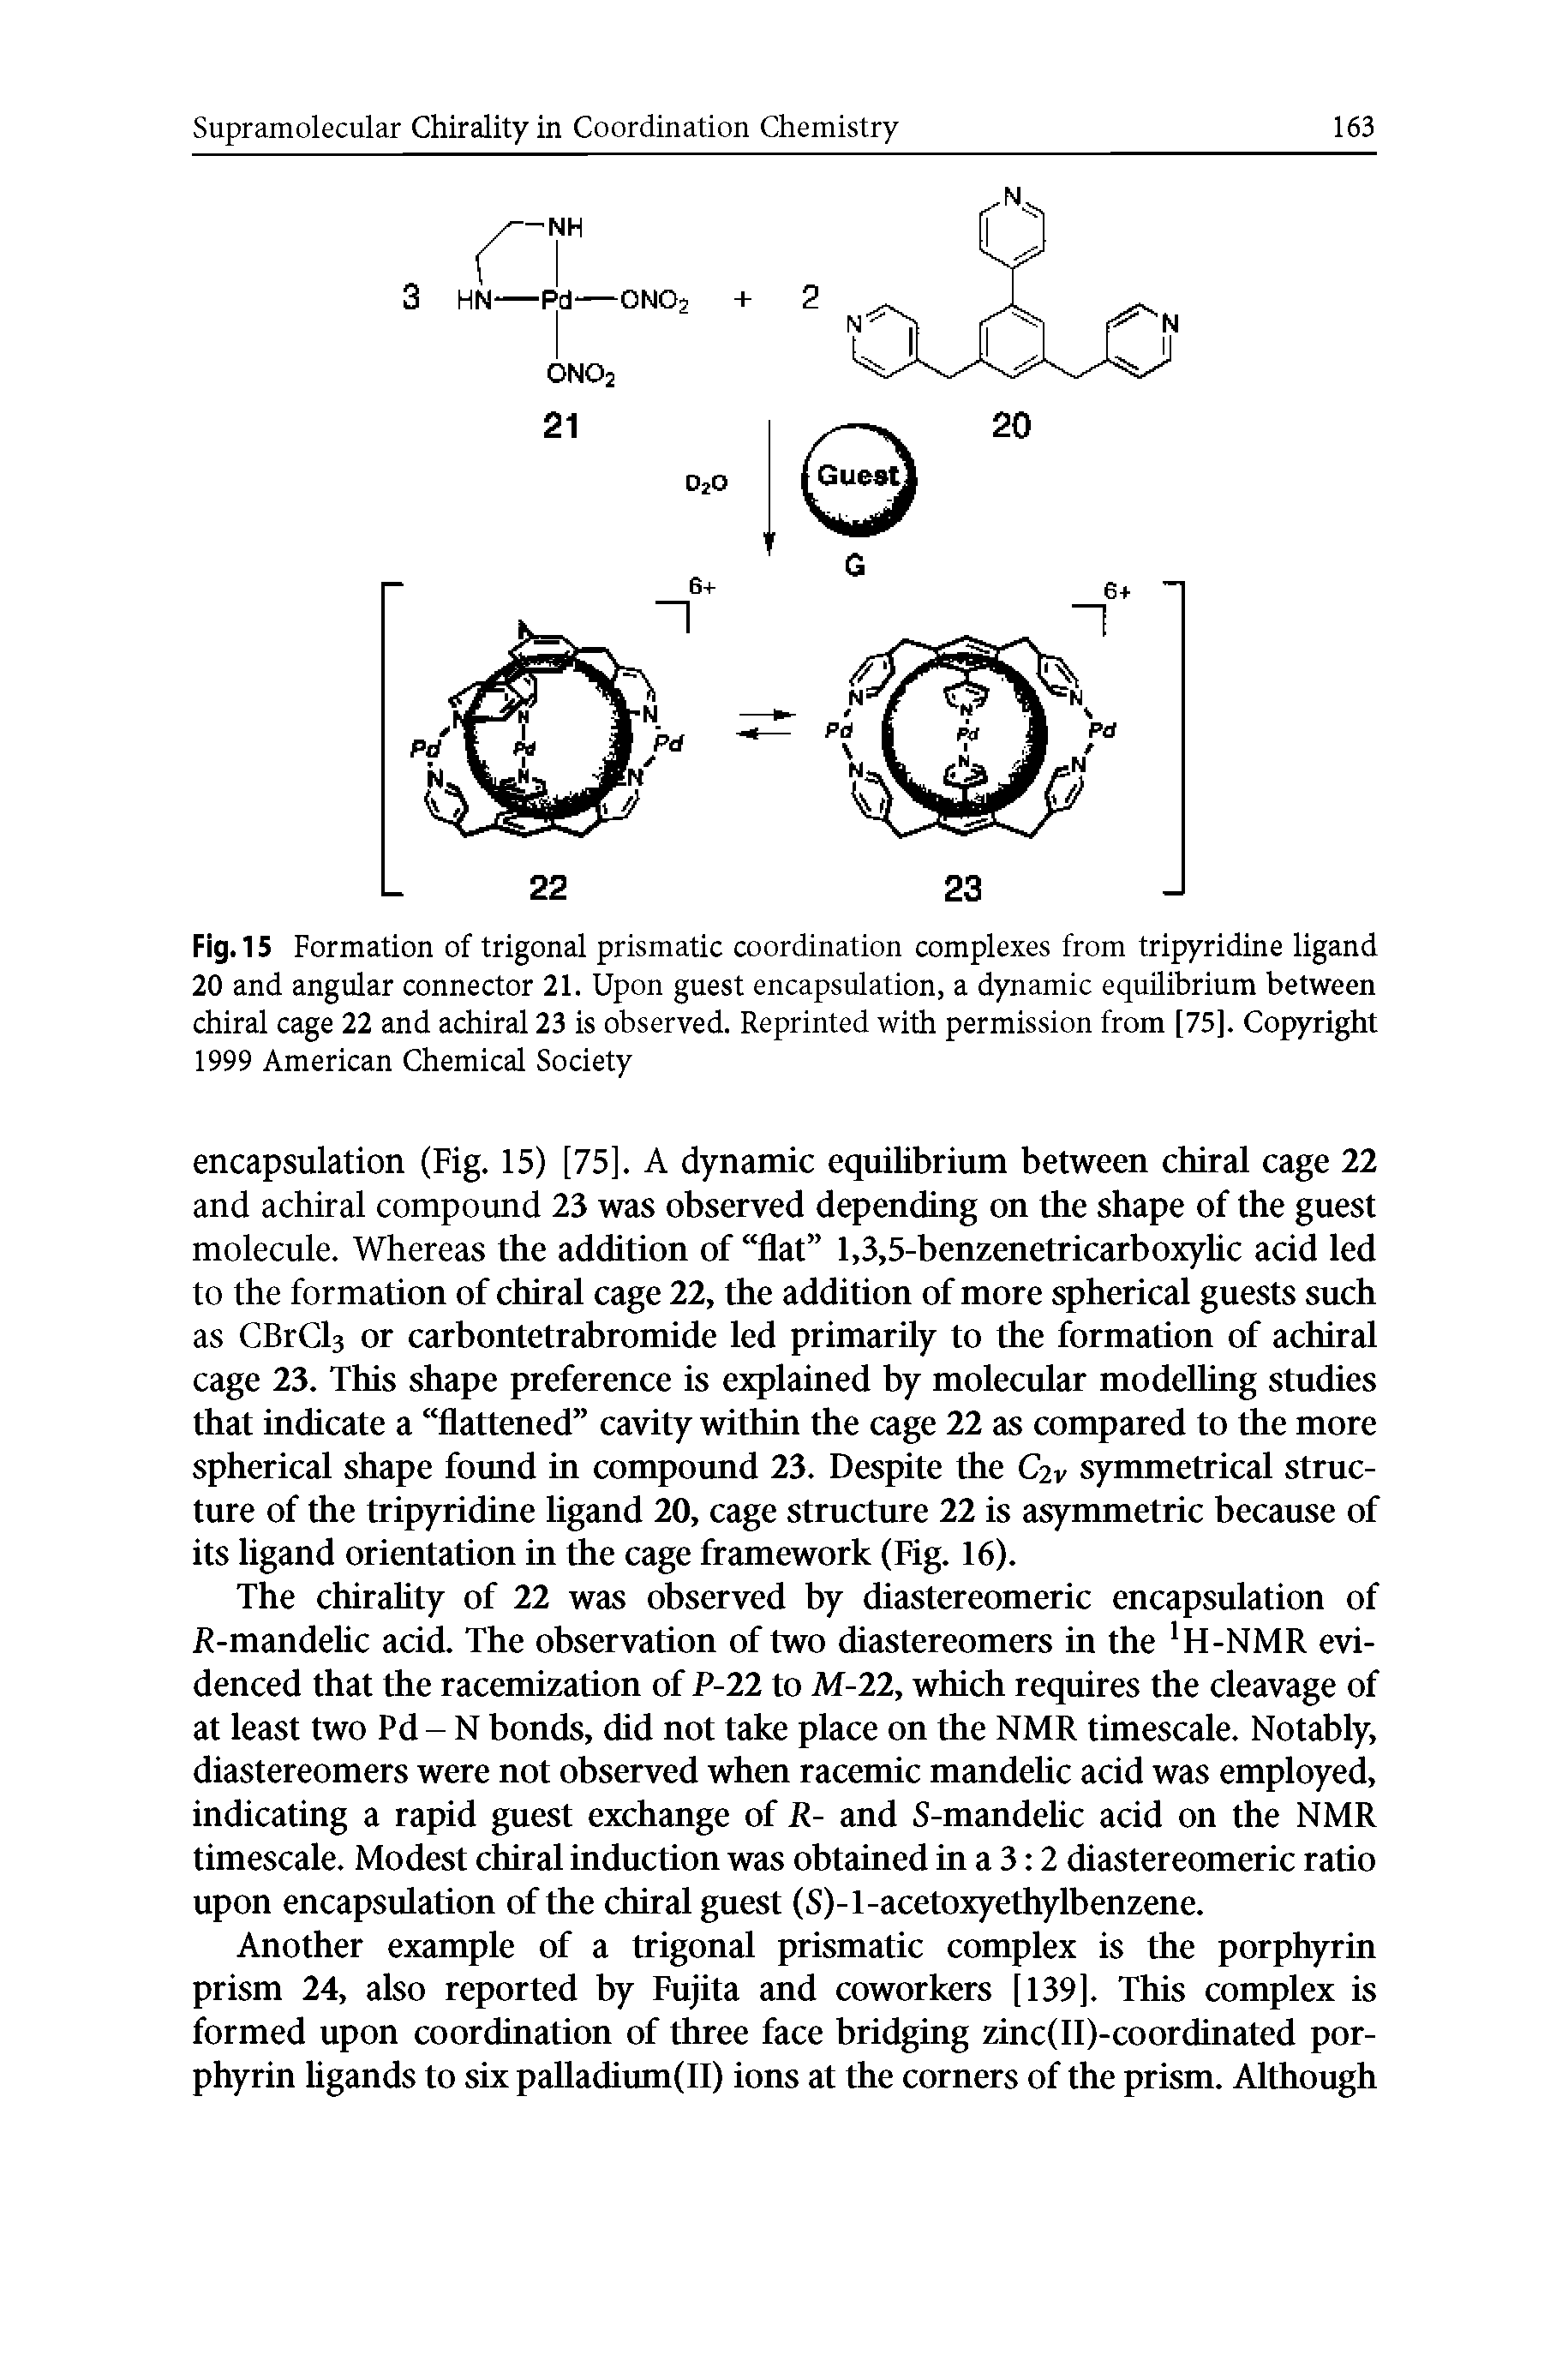 Fig. 15 Formation of trigonal prismatic coordination complexes from tripyridine ligand 20 and angular connector 21. Upon guest encapsulation, a dynamic equilibrium between chiral cage 22 and achiral 23 is observed. Reprinted with permission from [75]. Copyright 1999 American Chemical Society...